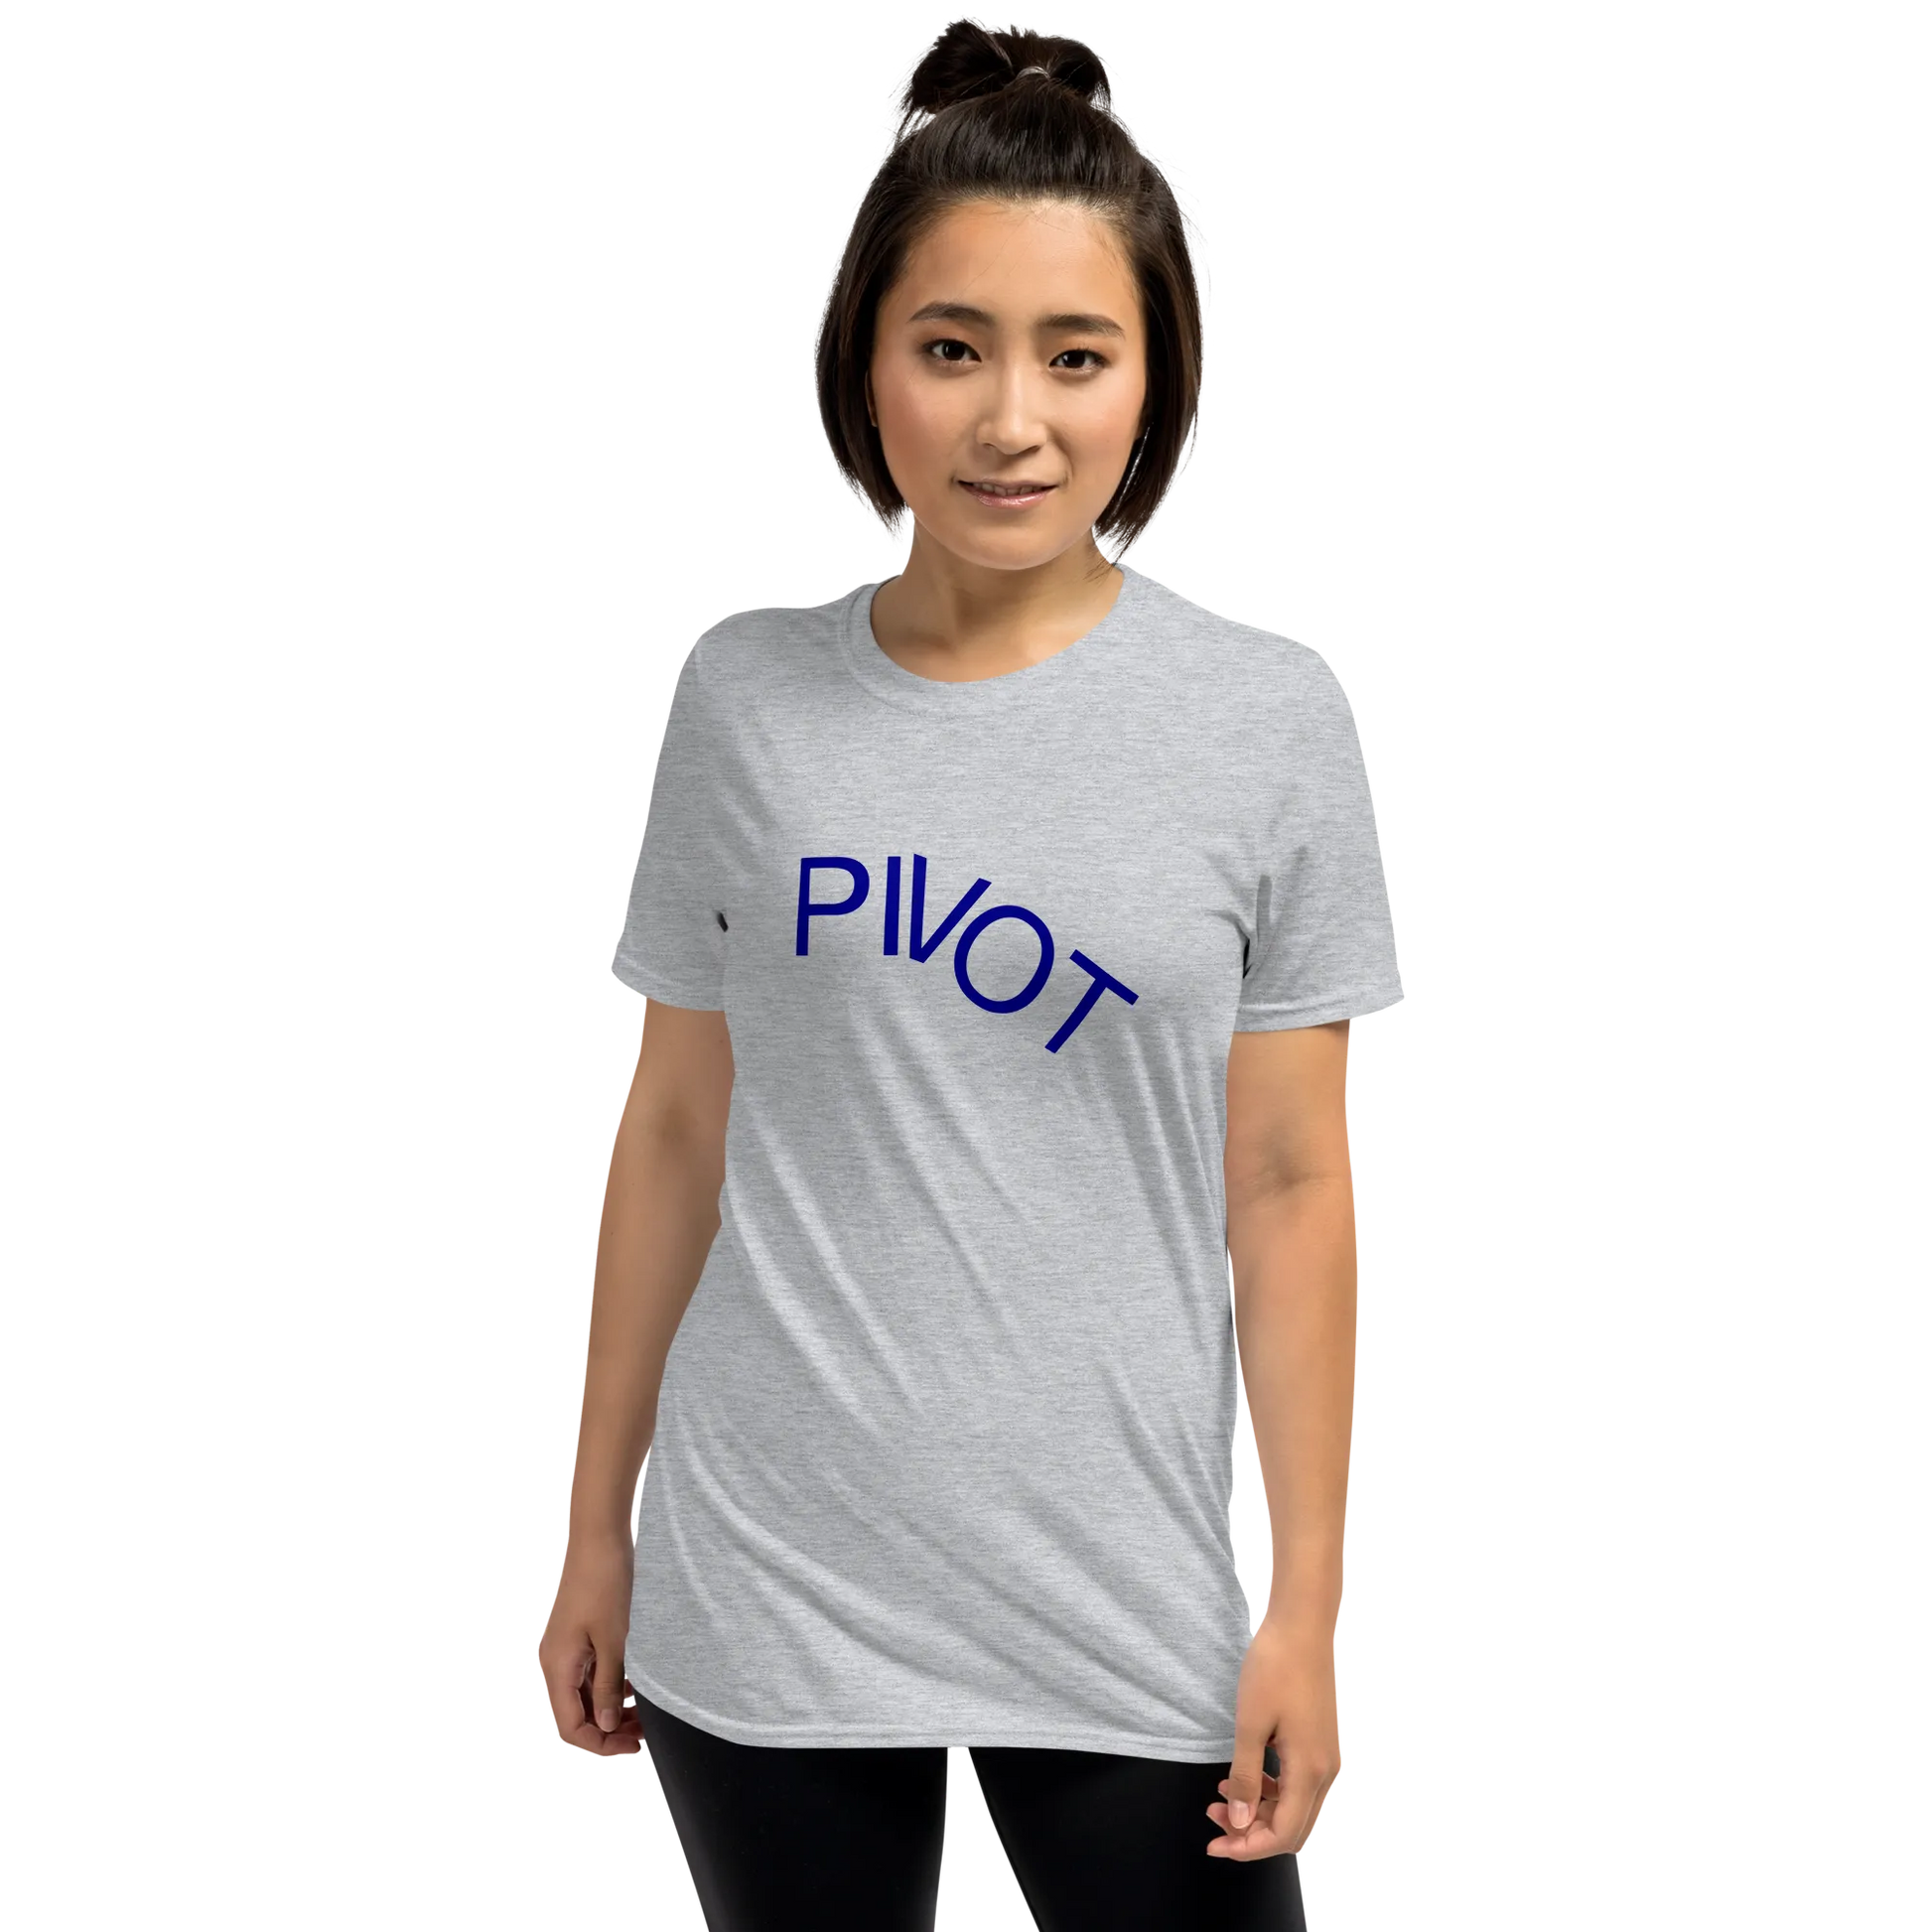 Pivot Tee in Sport Grey on woman front